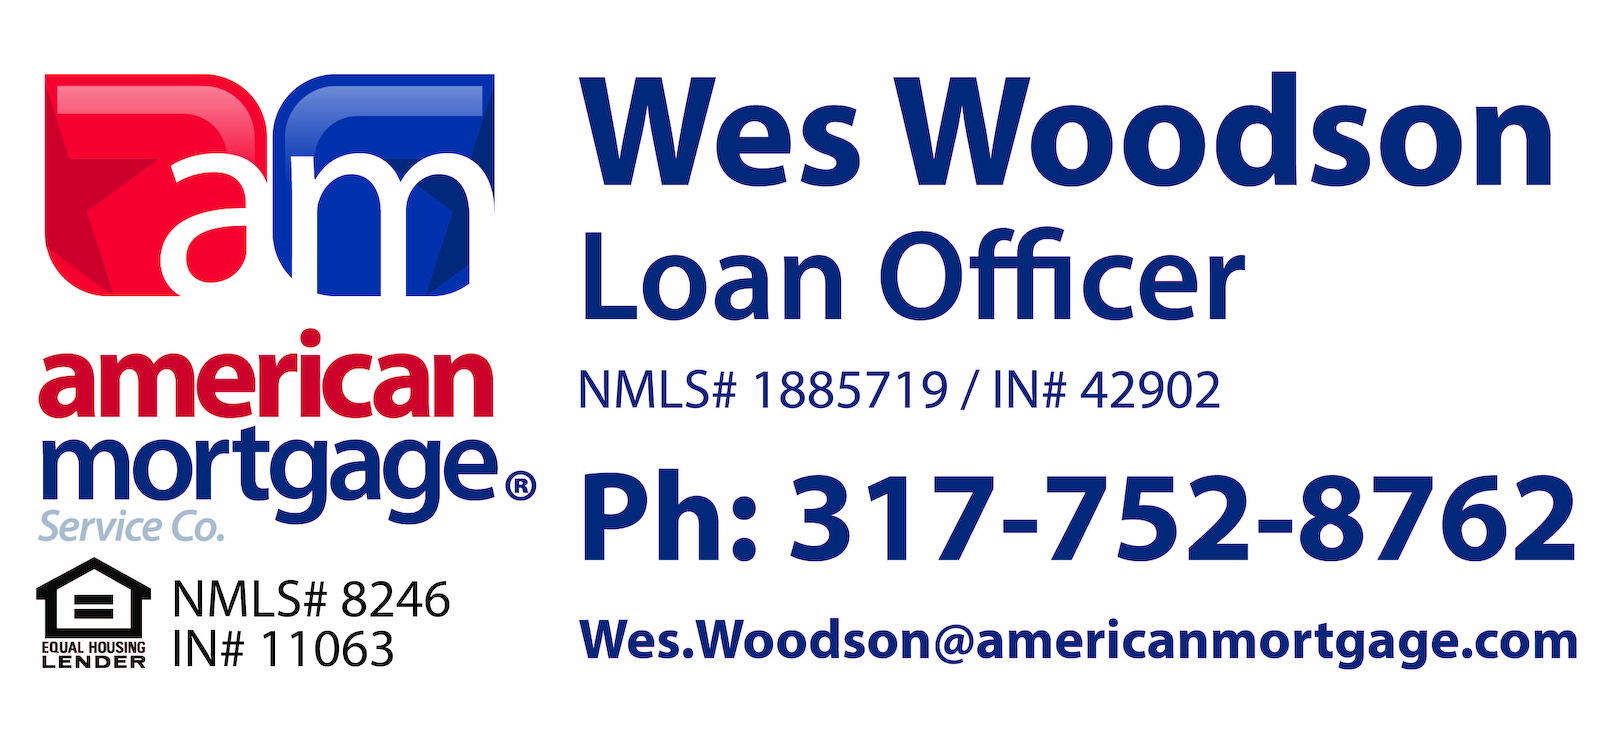 Wes Woodson of American Mortgage